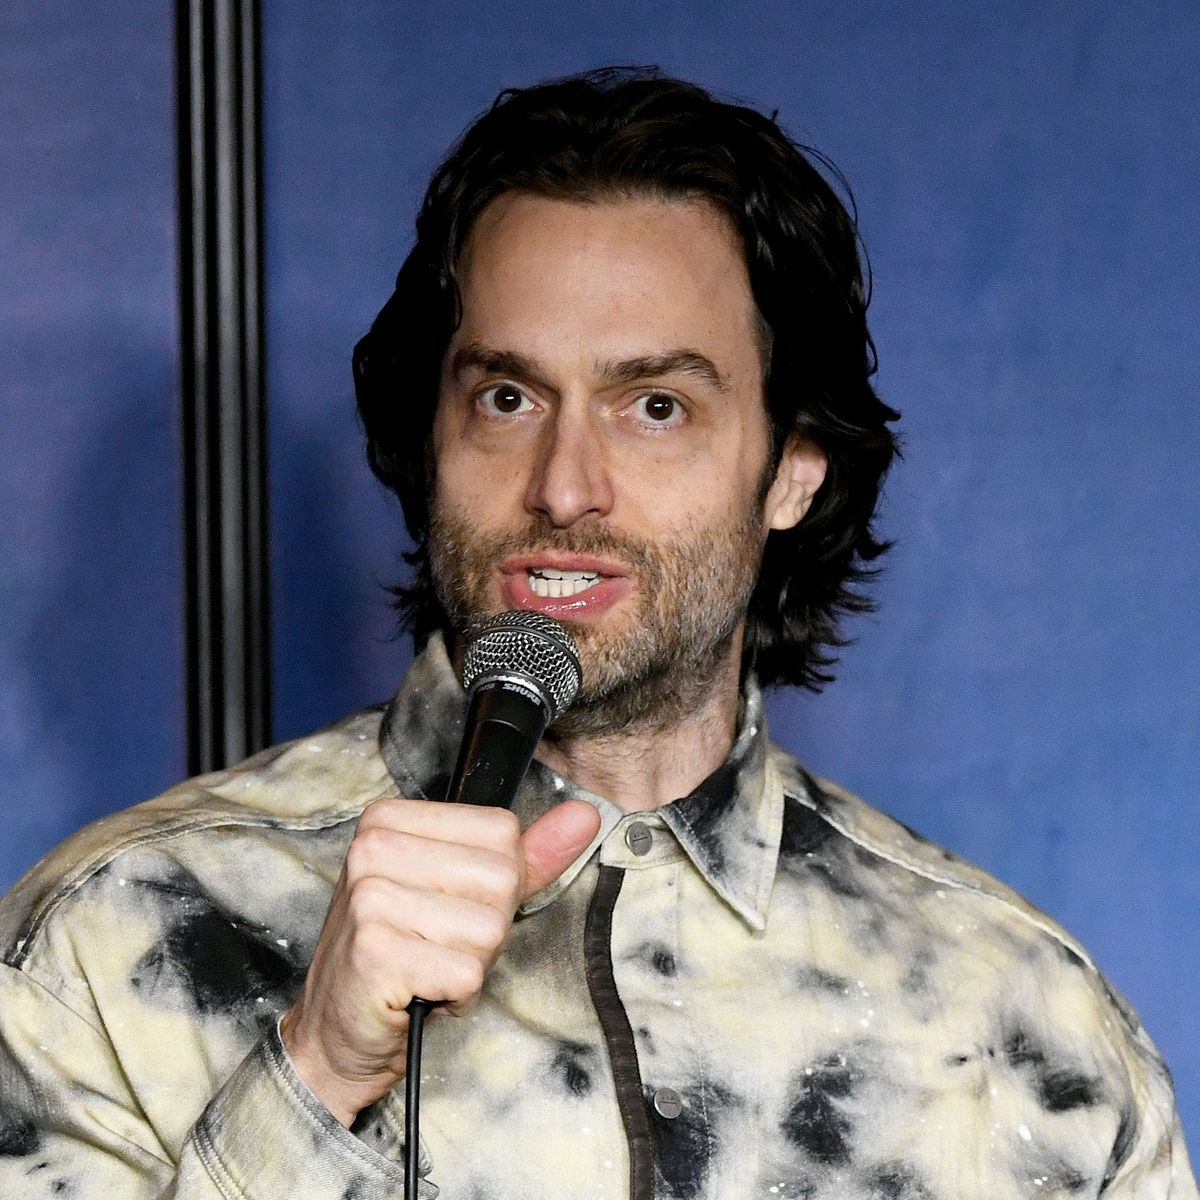 Chris D Elia Denies Sexual Misconduct Claims In New Video